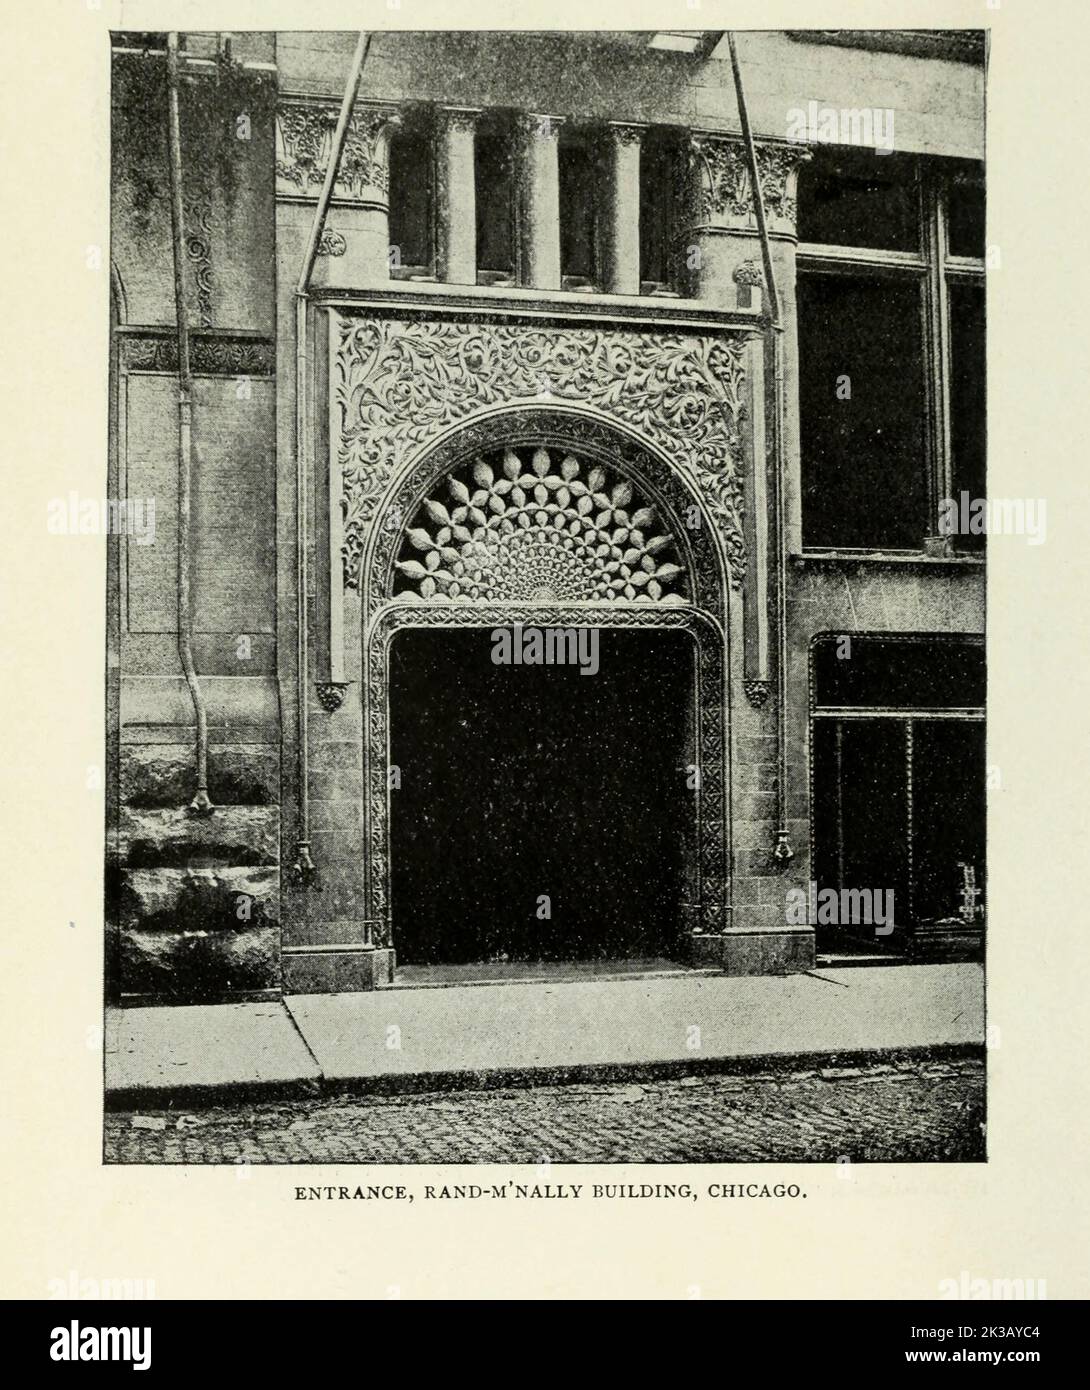 Entrance to Rand-M'nally Building, Chicago from the Article THE USE OF TERRA-COTTA IN MODERN BUILDINGS. By George M. R. Twose.  from The Engineering Magazine DEVOTED TO INDUSTRIAL PROGRESS Volume VIII April to September, 1895 NEW YORK The Engineering Magazine Co Stock Photo